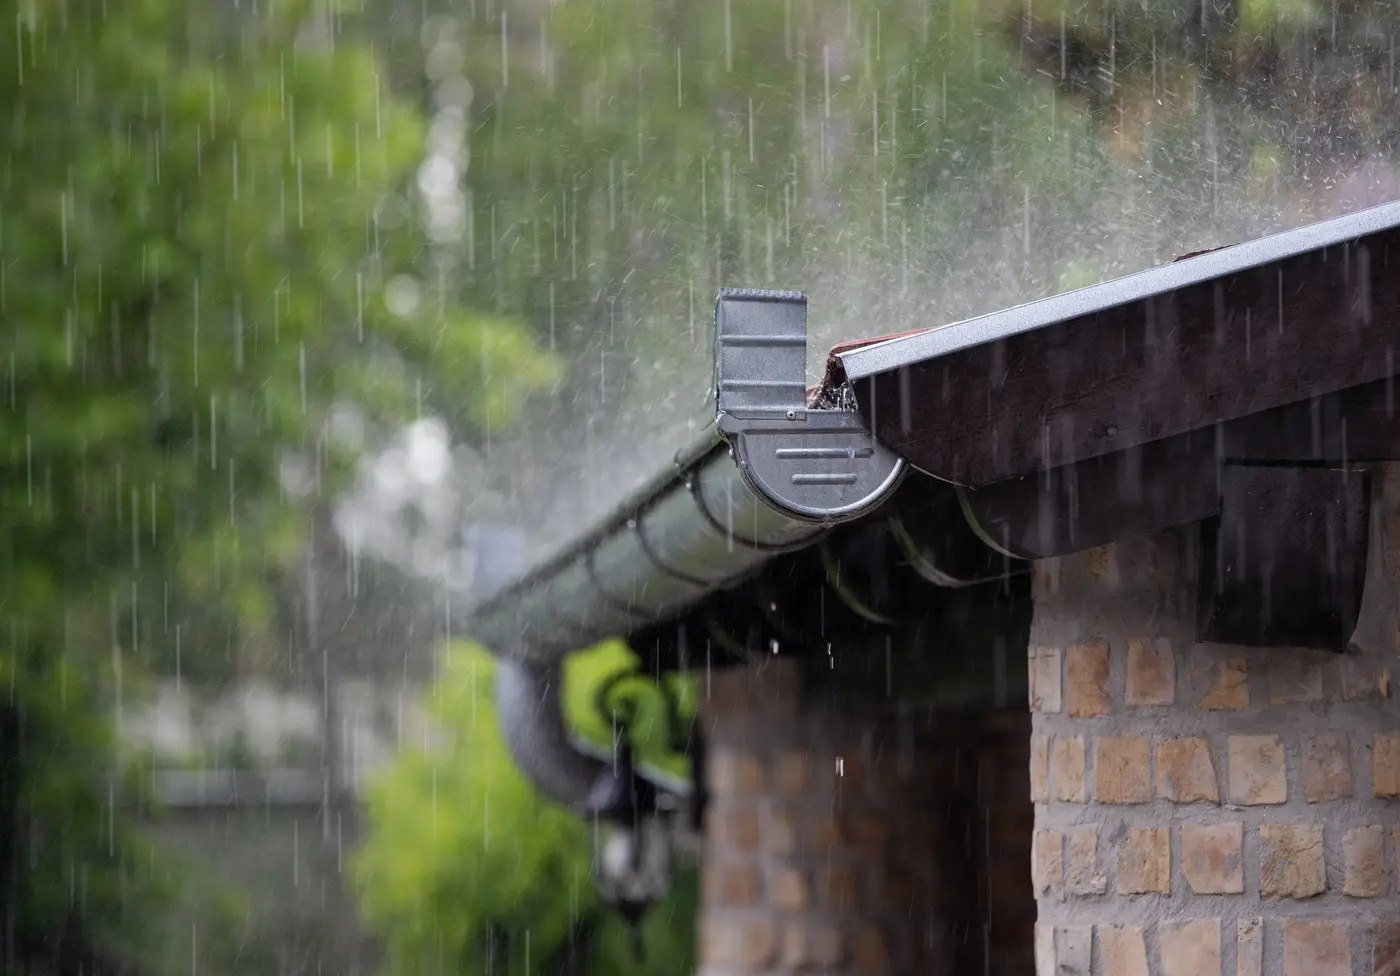 Heavy rain on metal gutter and roof